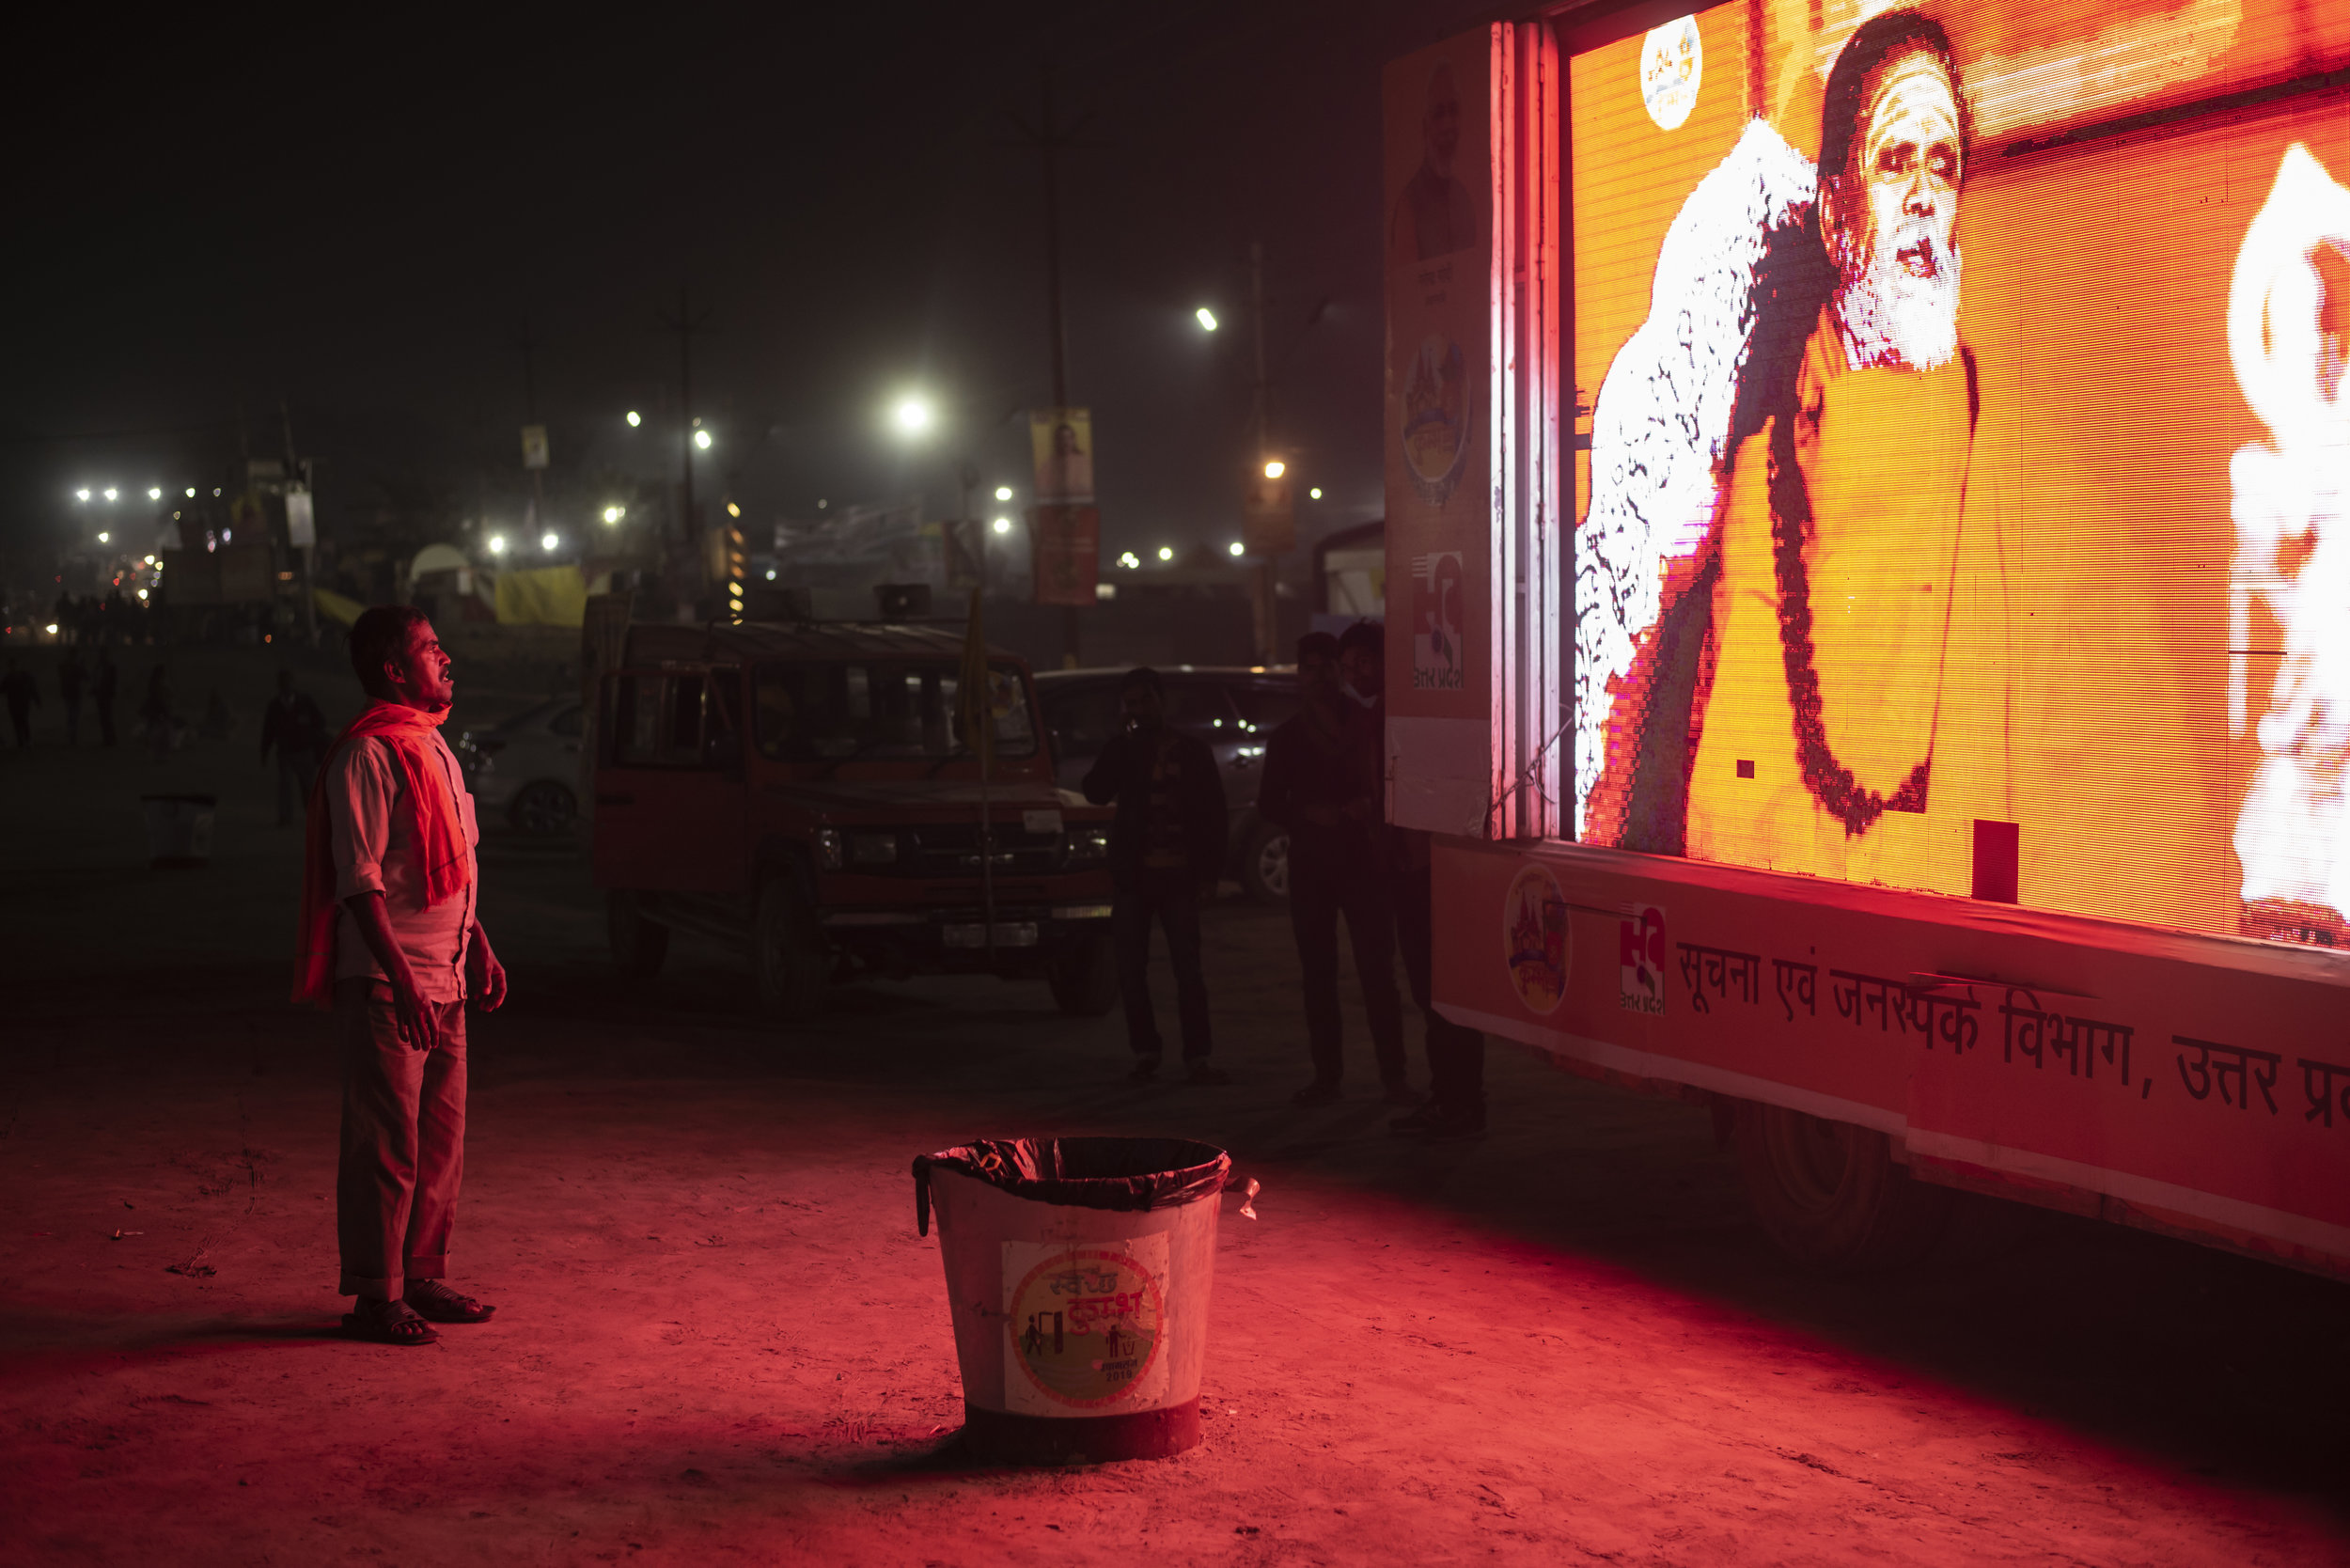  A man stands, captured in crimson light, downloading the teachings from the glowing roadside sadhu. Here at Kumbh consciousness moves. It is pulled and pushed. For some it shrinks and others it expands. 